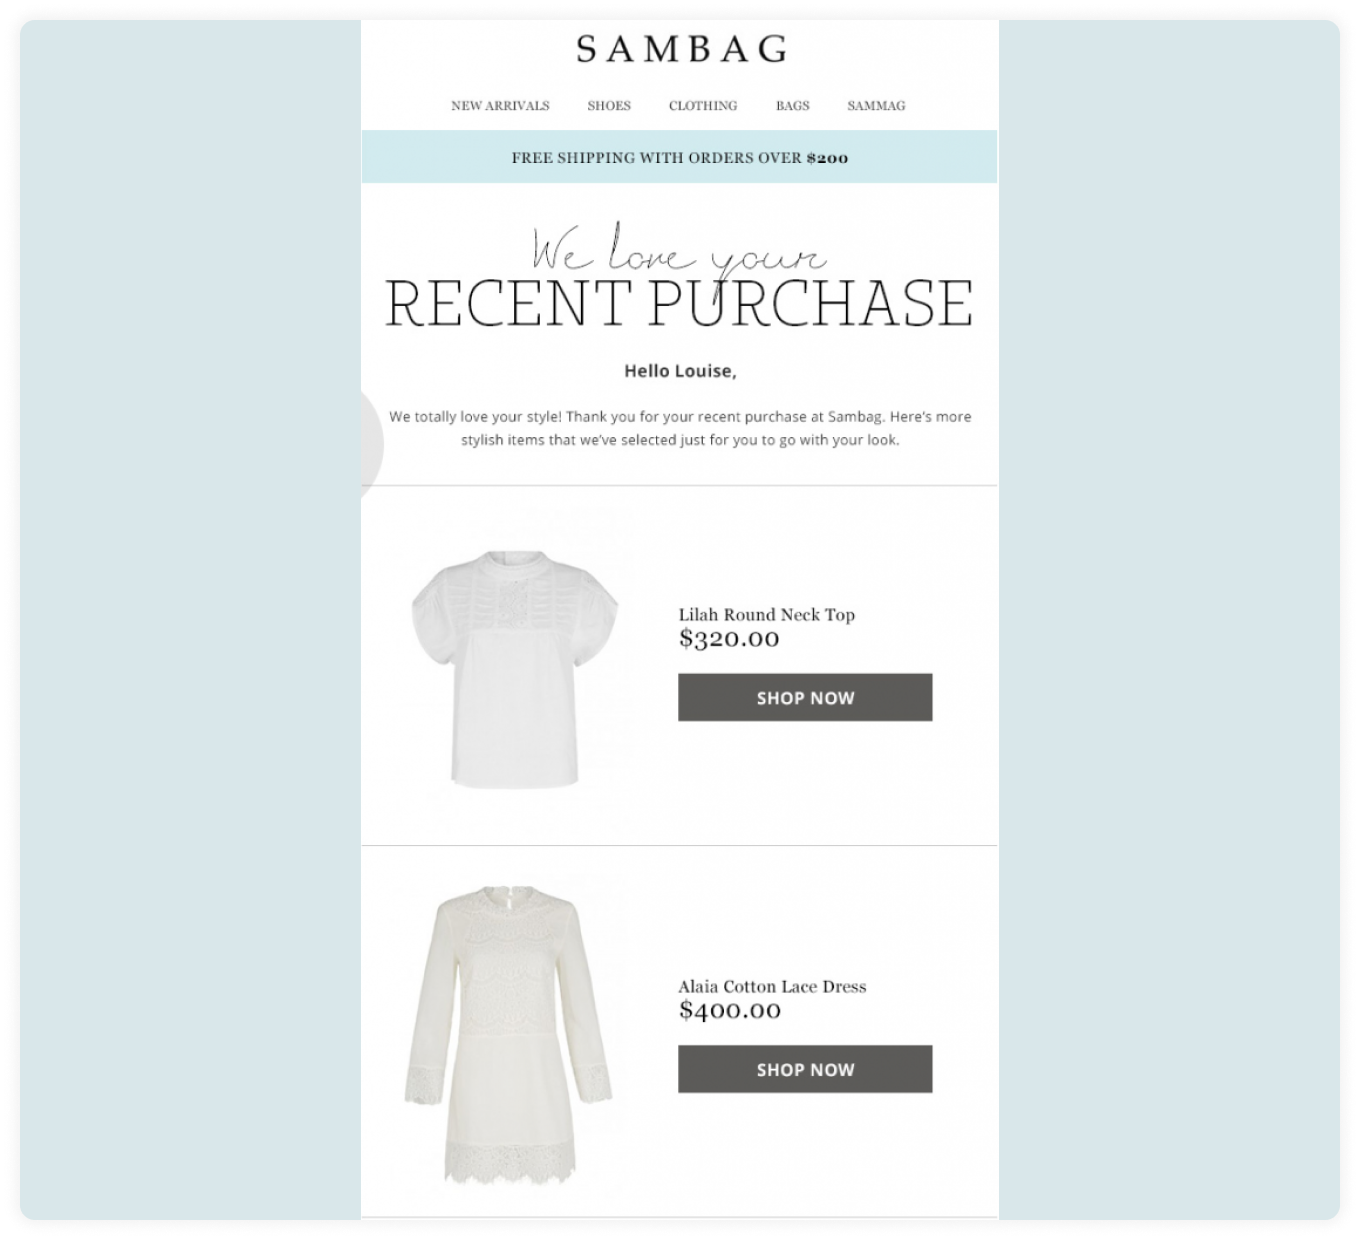 Sambag using cross-sell nudges: Product recommendation